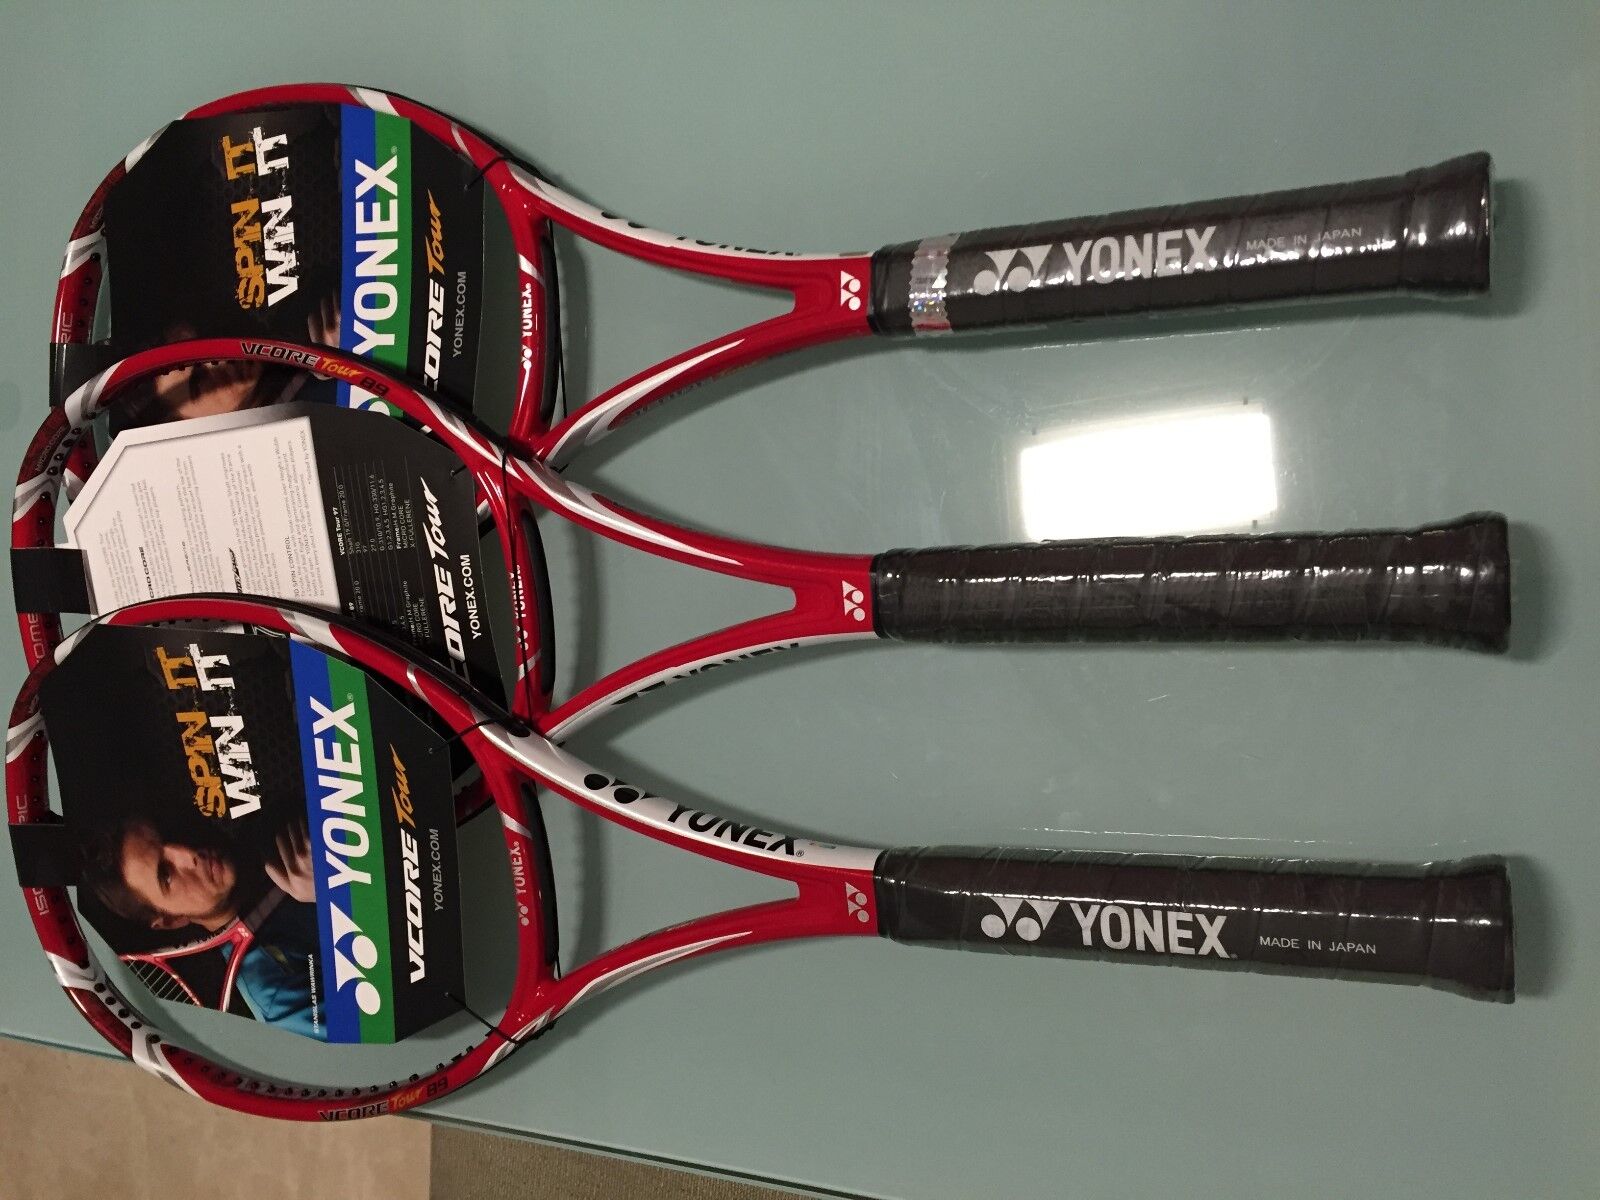 Yonex Vcore tour 89 new in plastic Last 4 pieces! hewitt nalbandian Tomic  see!